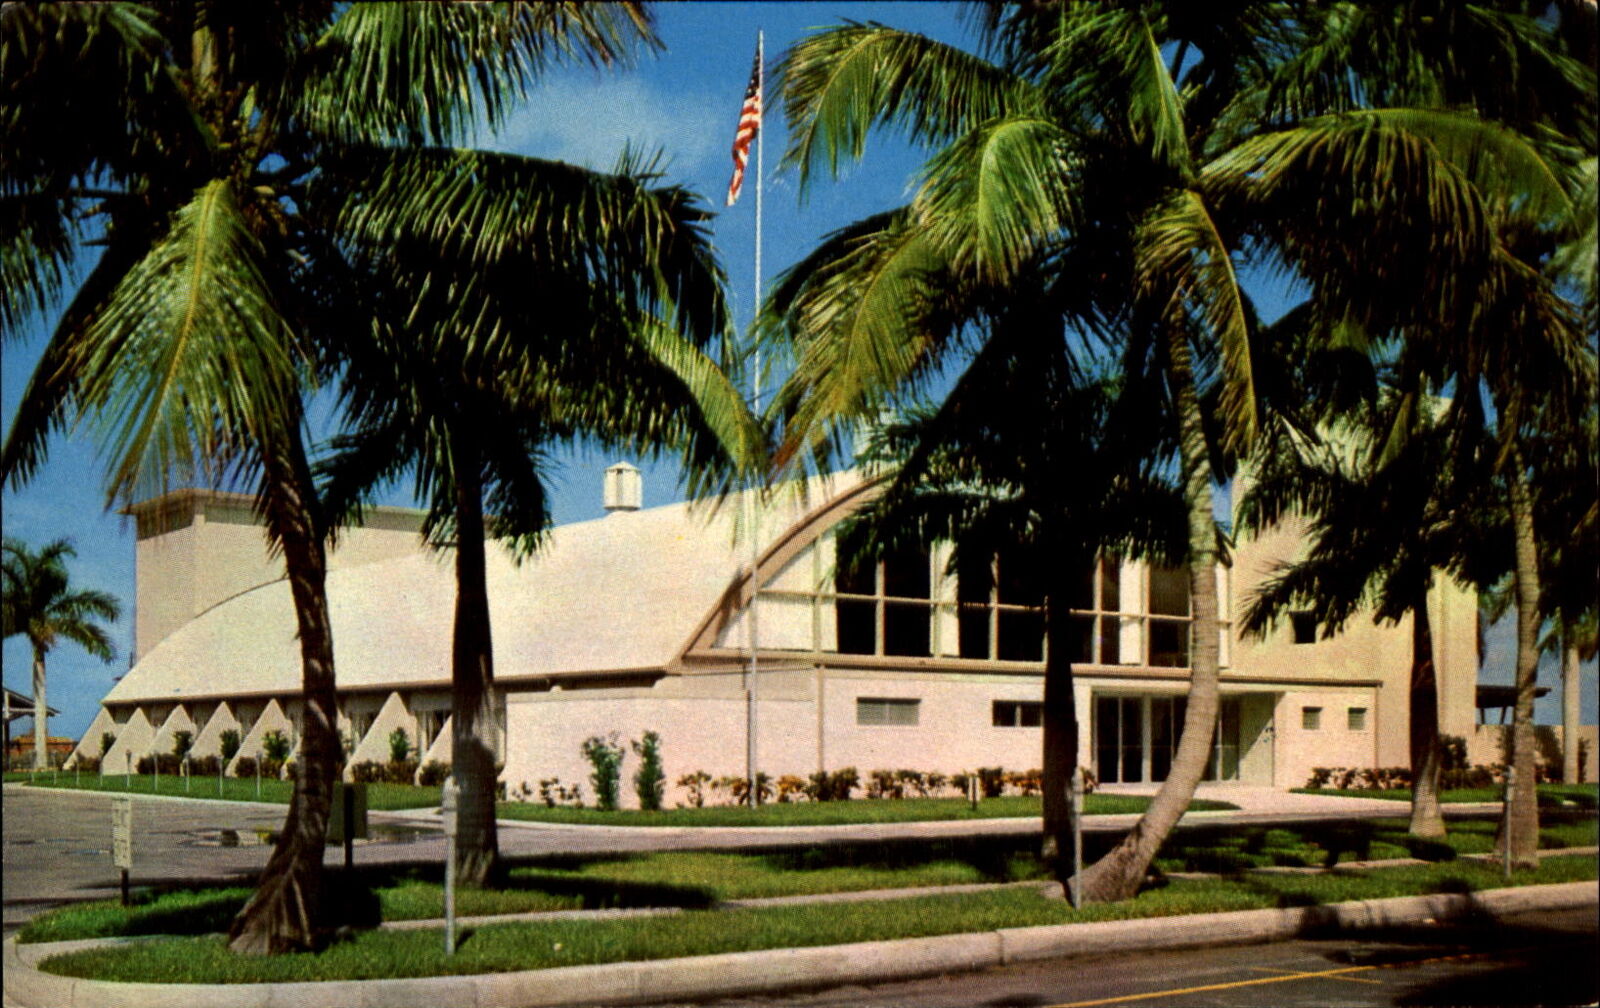 Exhibition Hall on Caloosahatchee River Fort Myers Florida palm trees ~ 1950s